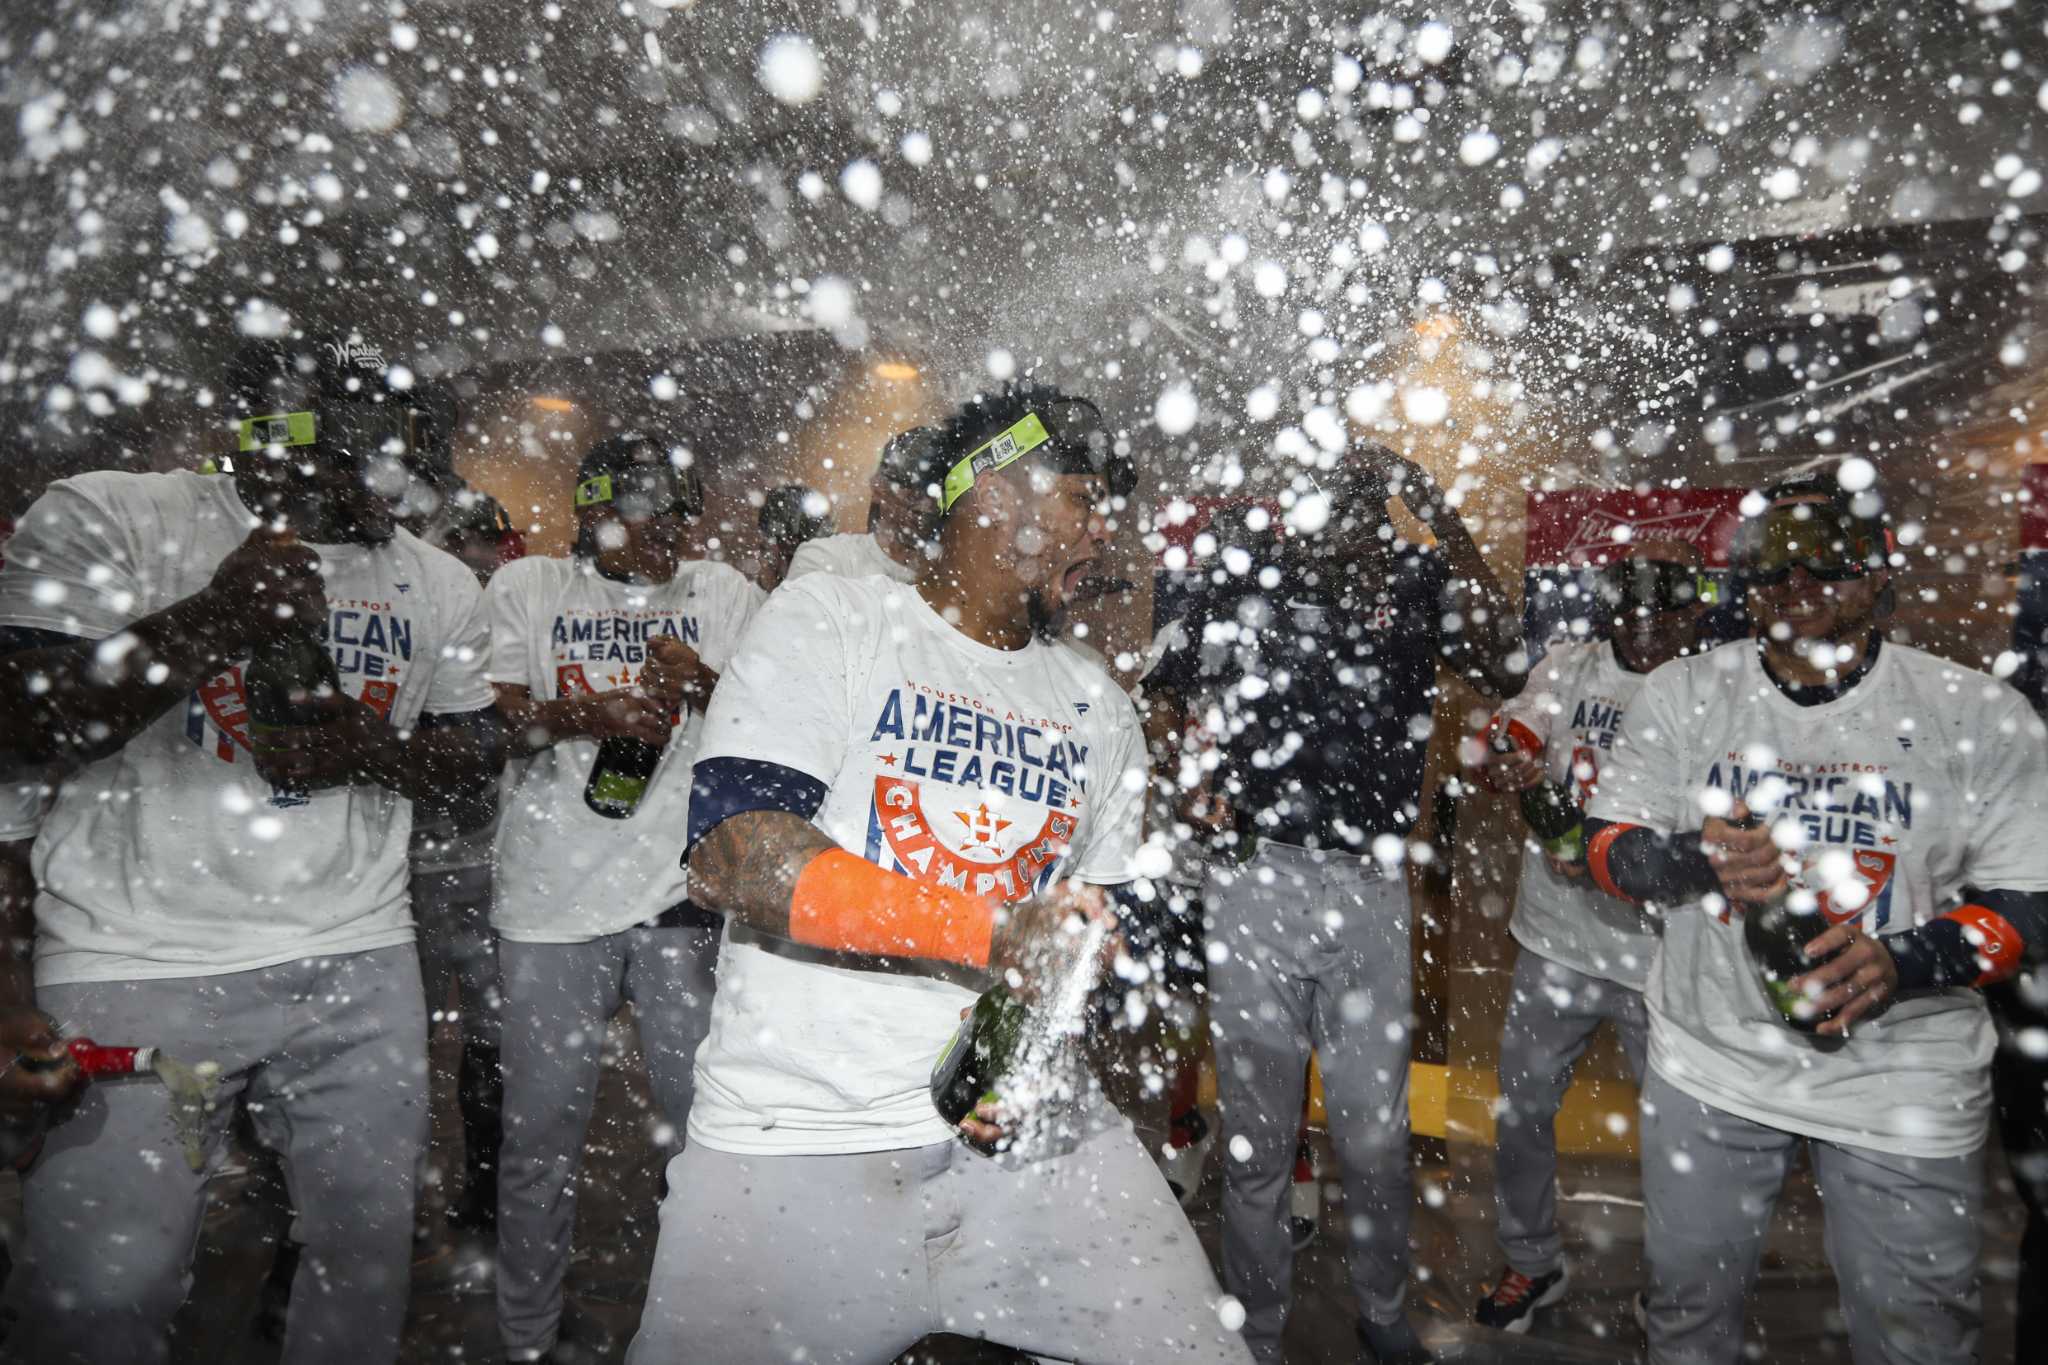 Astros Celebrate ALCS Sweep Over Yankees With Booze And Brooms